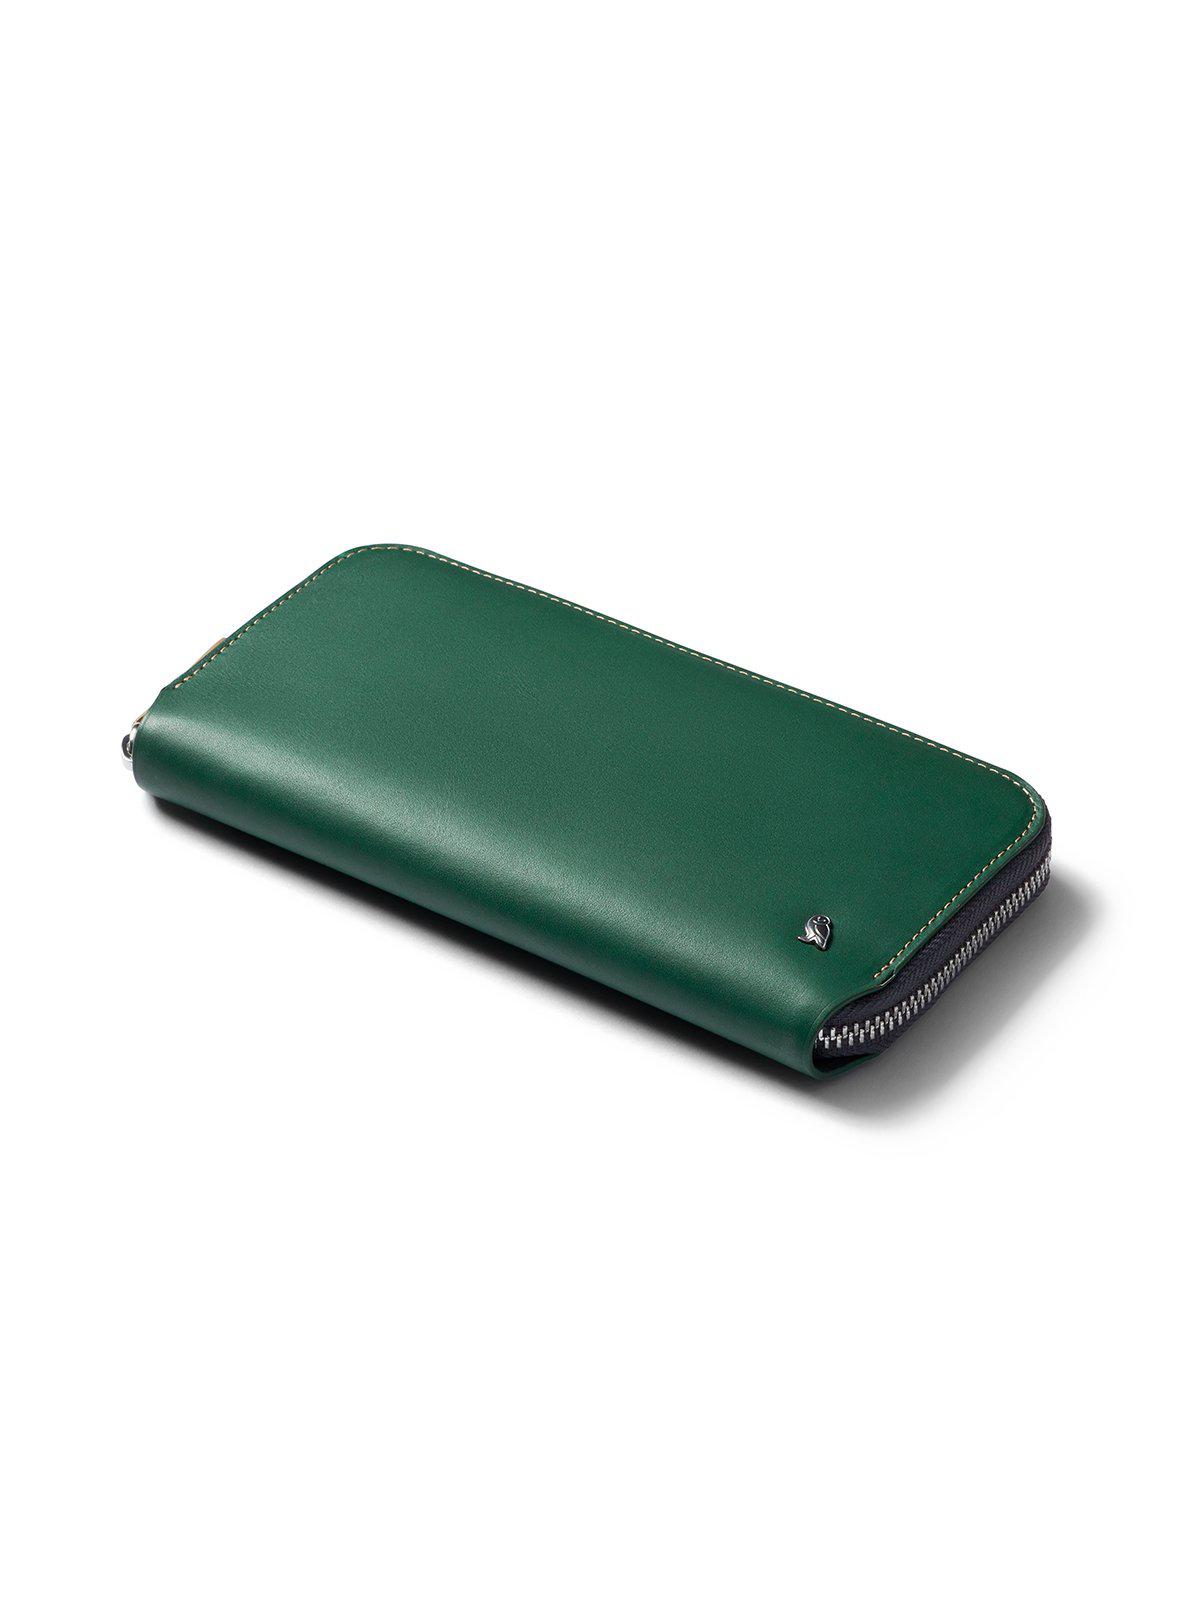 Bellroy Folio Wallet Racing Green RFID - MORE by Morello Indonesia